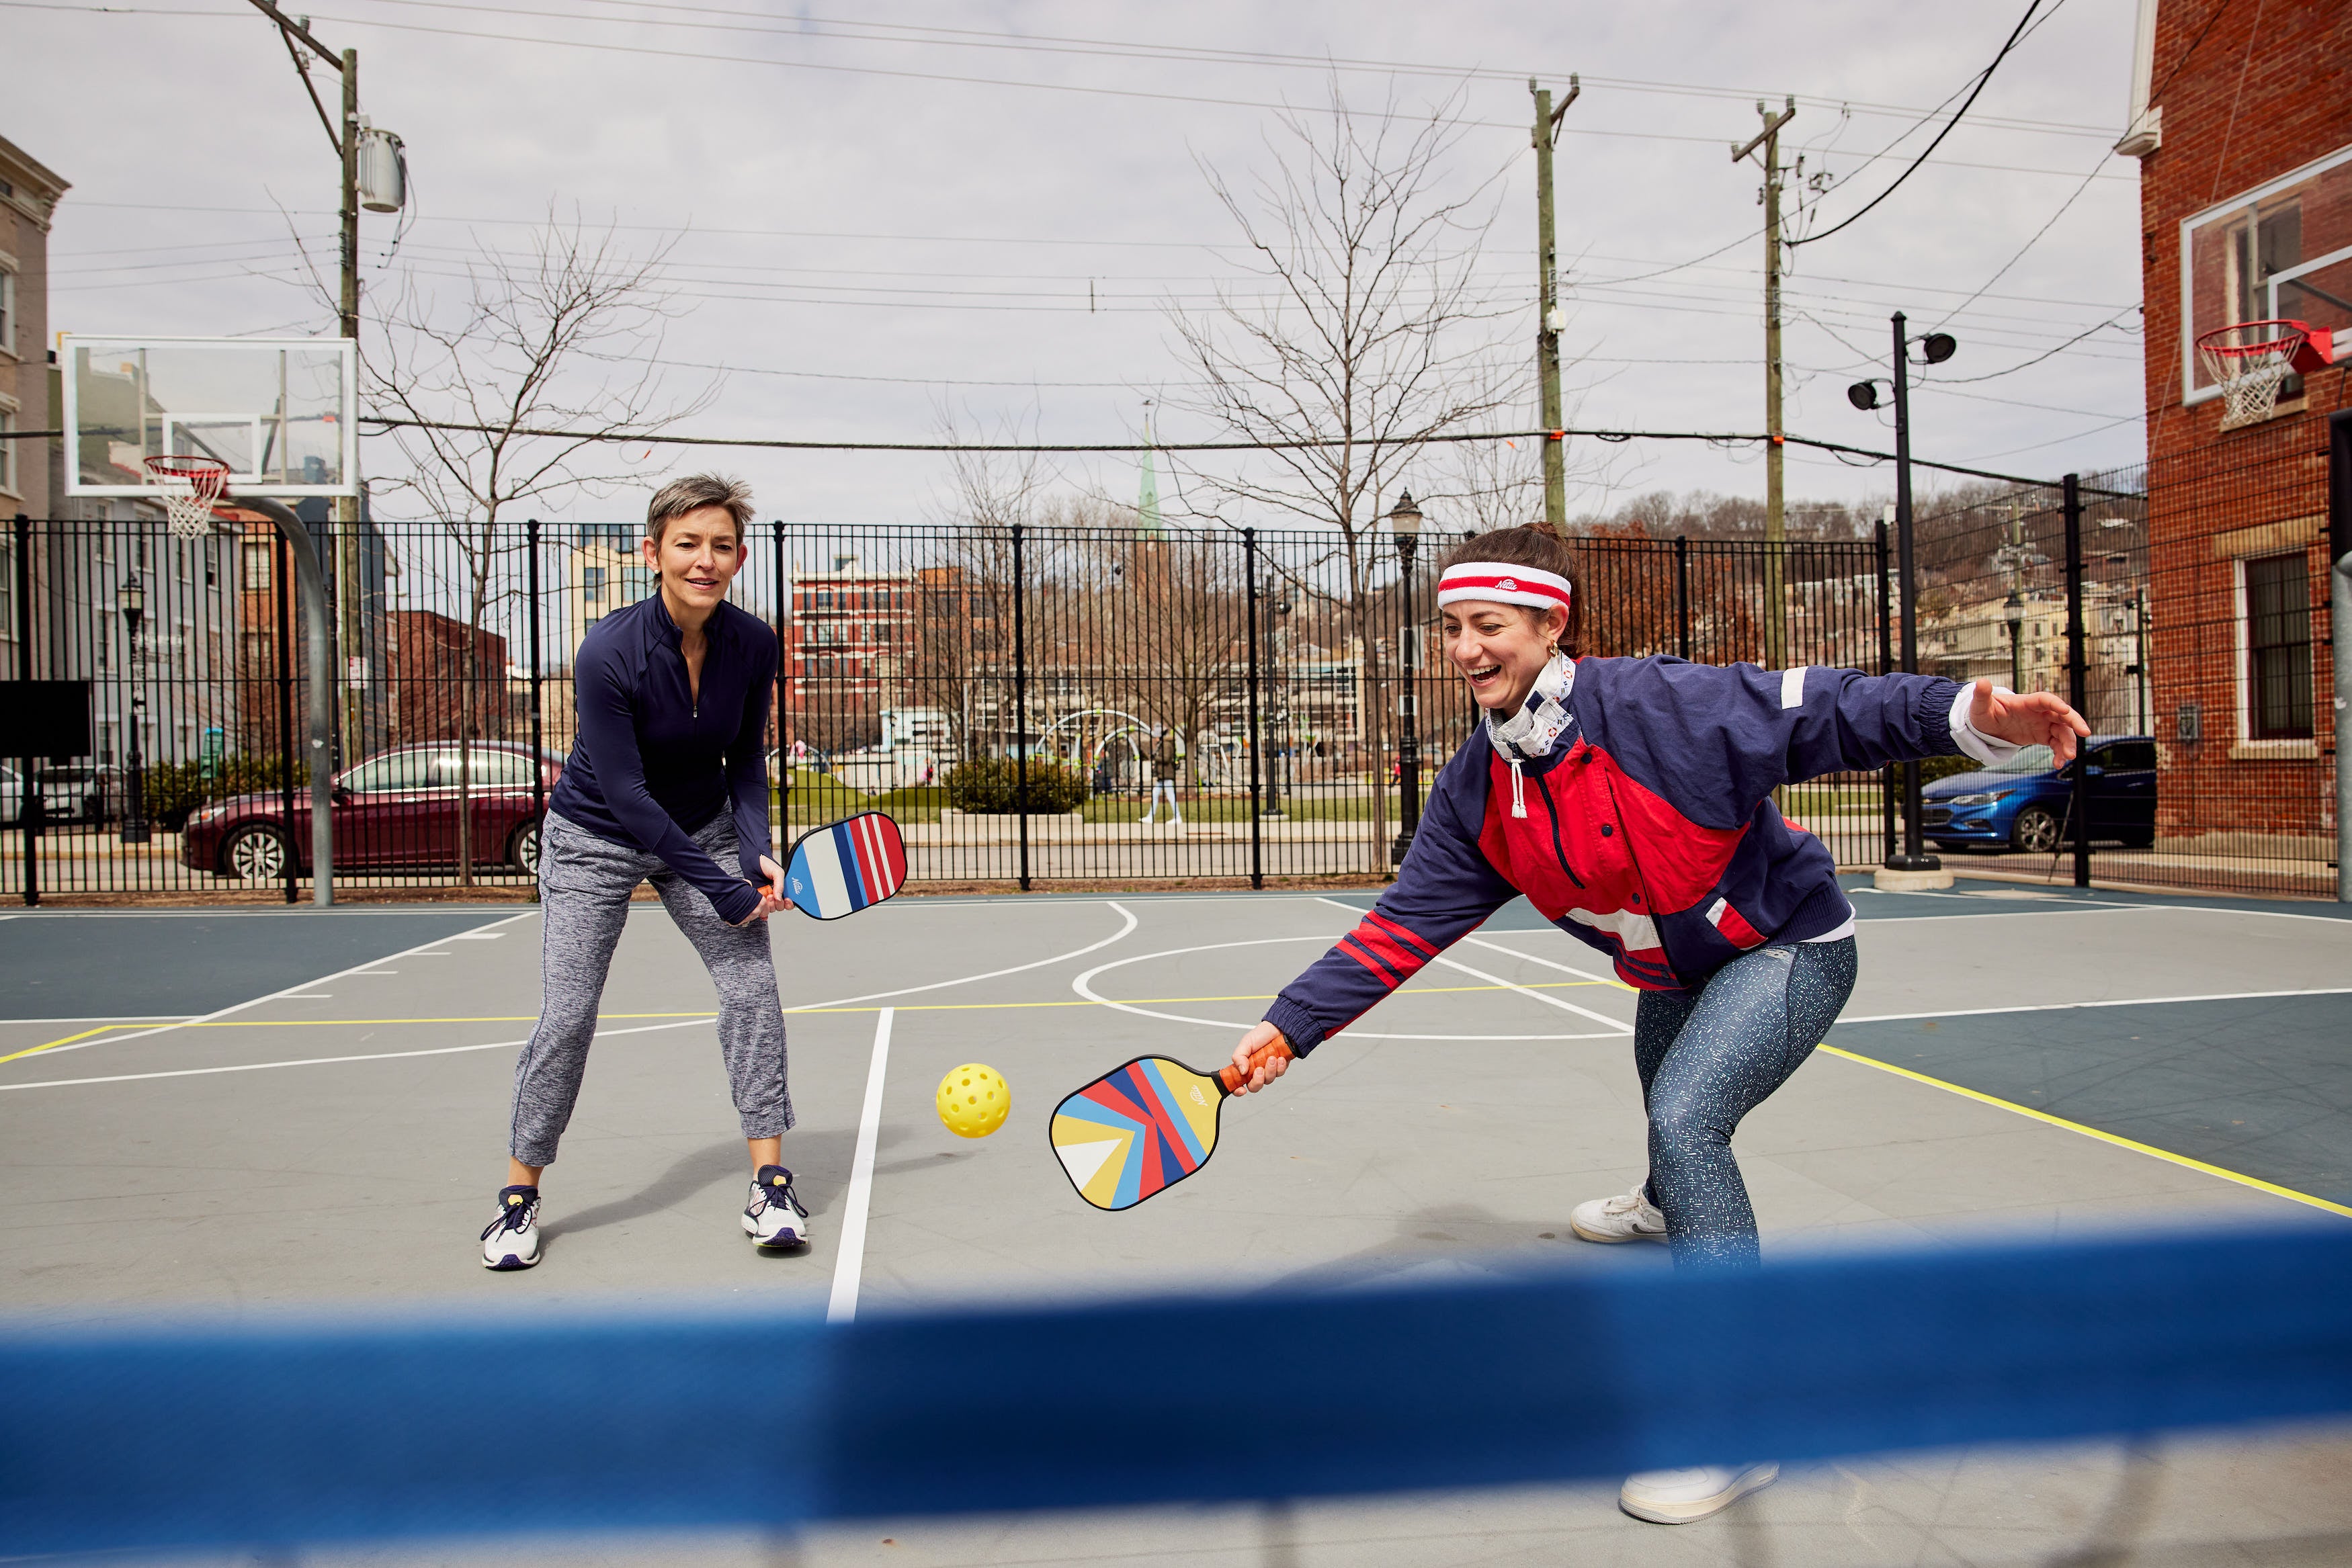 How did pickleball get its name?